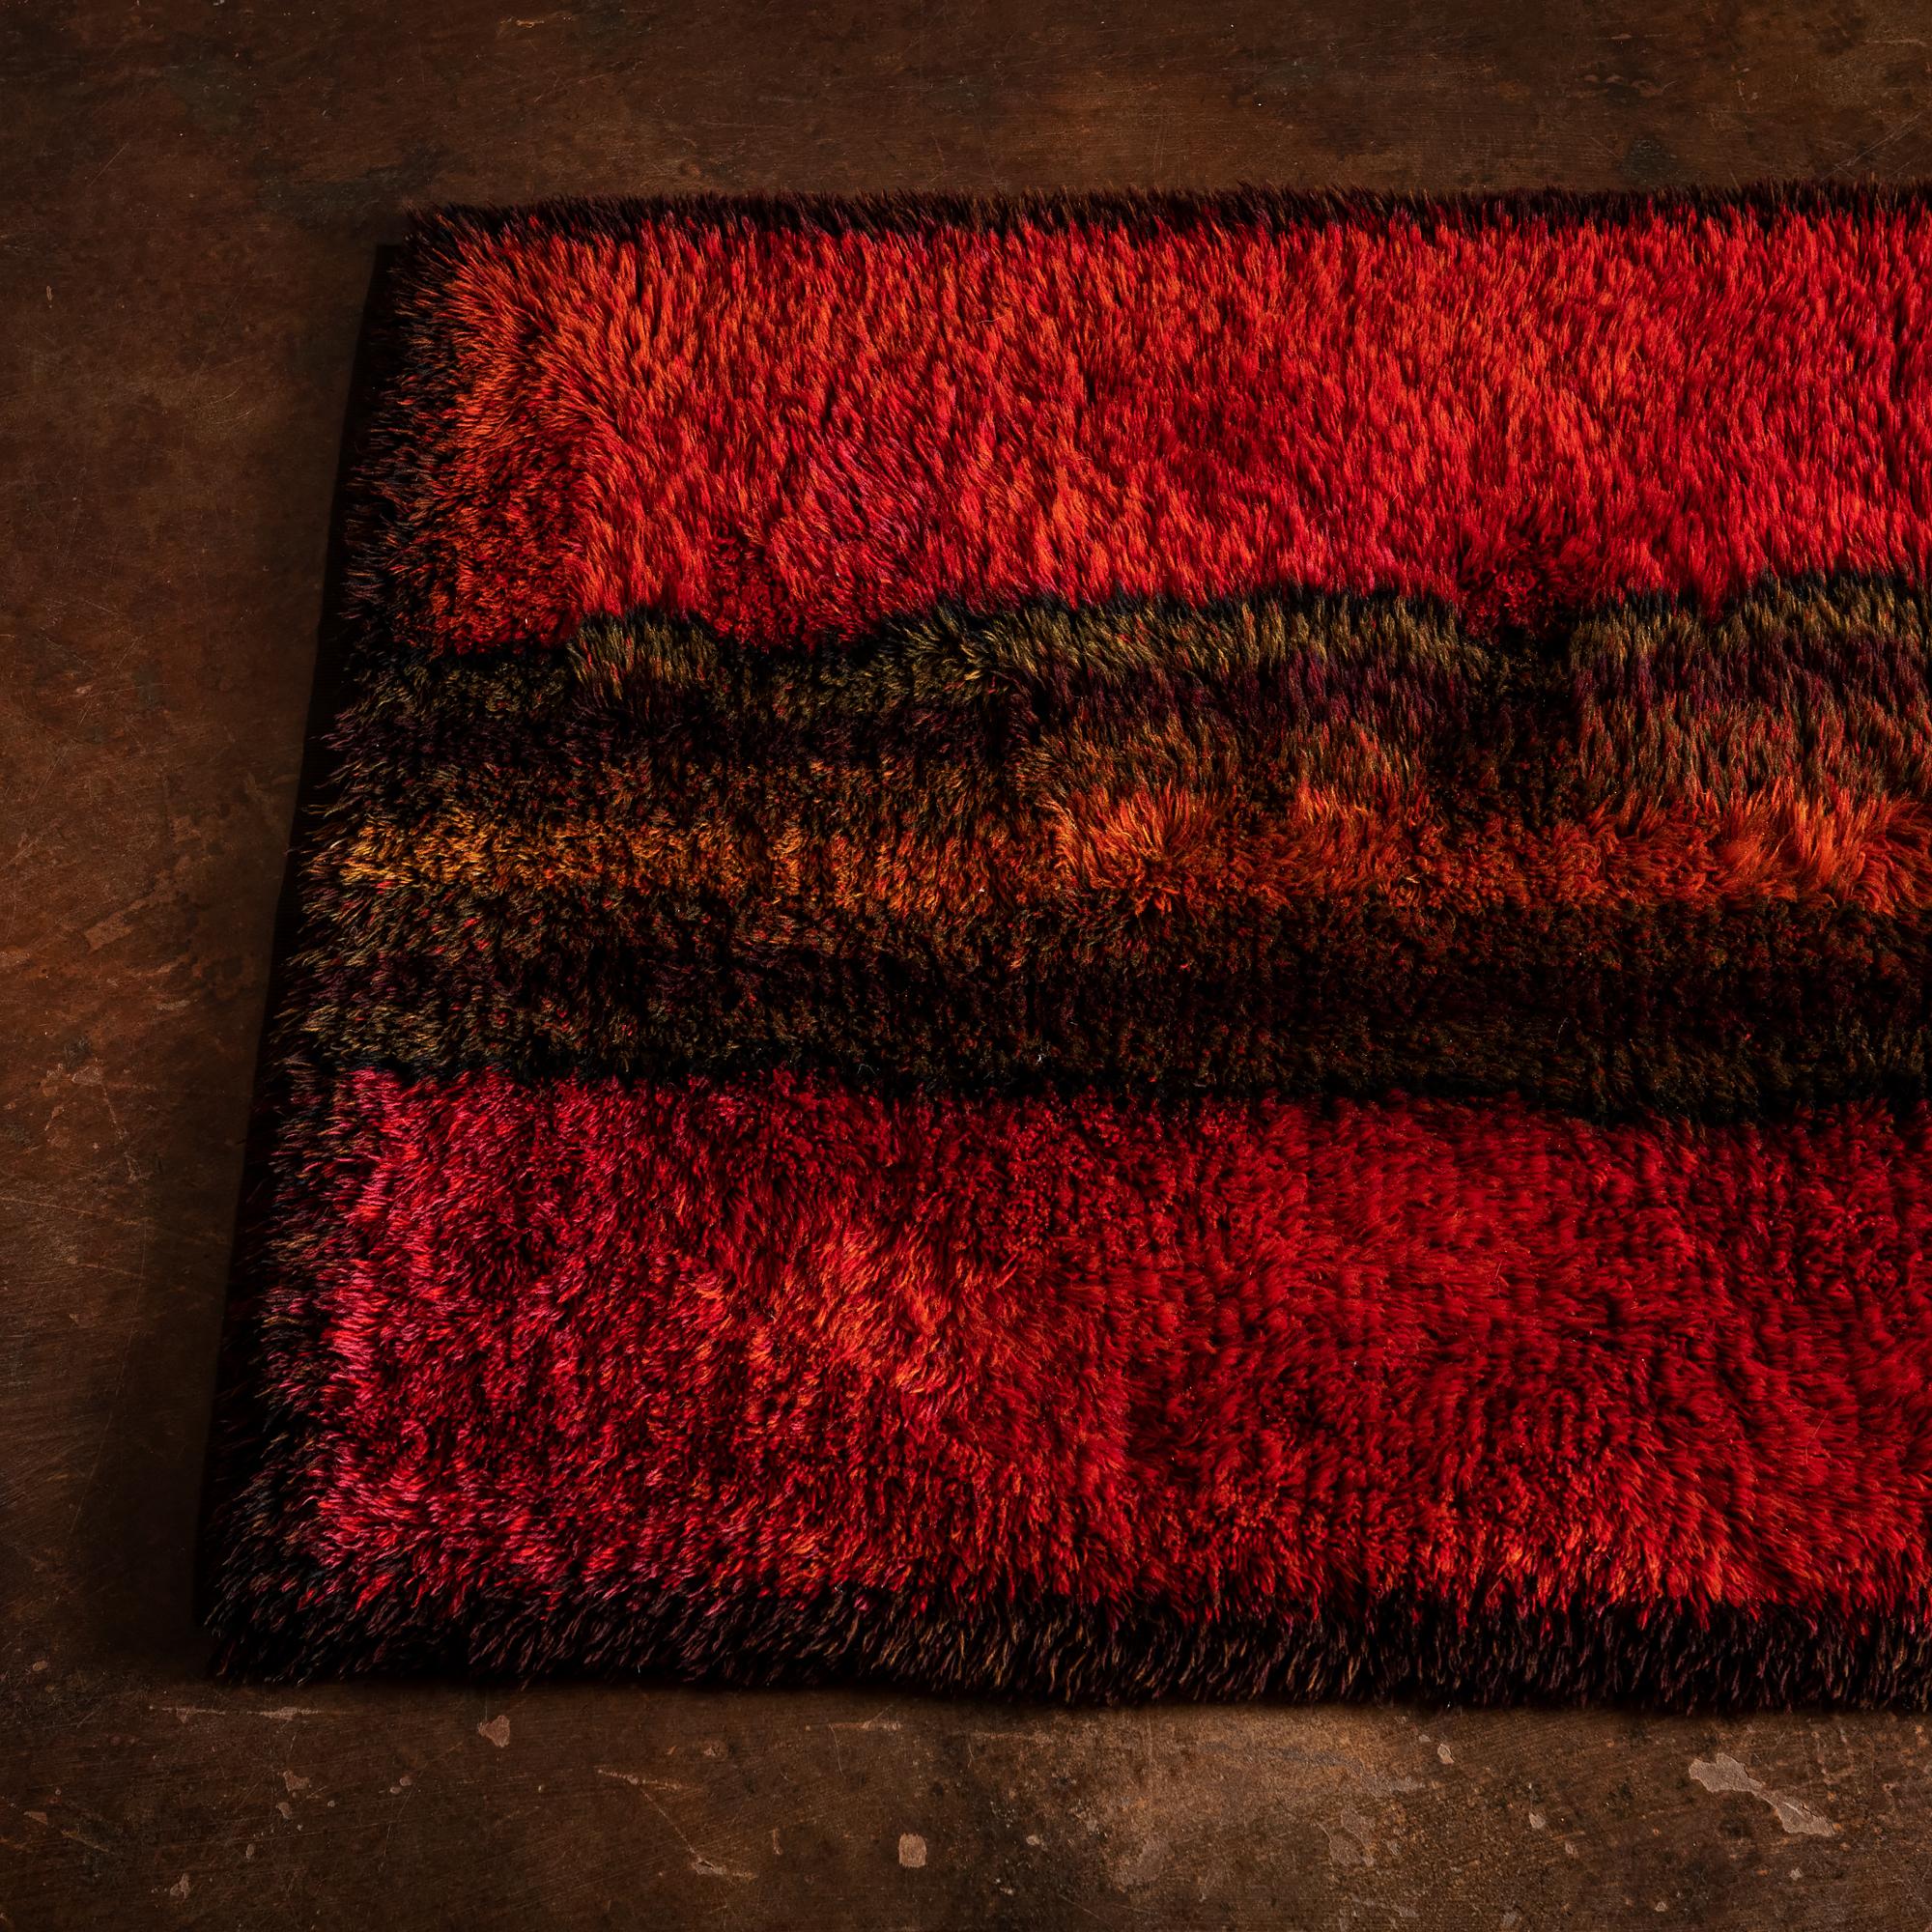 Hand-Woven Vibrant Red Wool Rya Rug by Ritva Puotila, Finland, 1960s For Sale